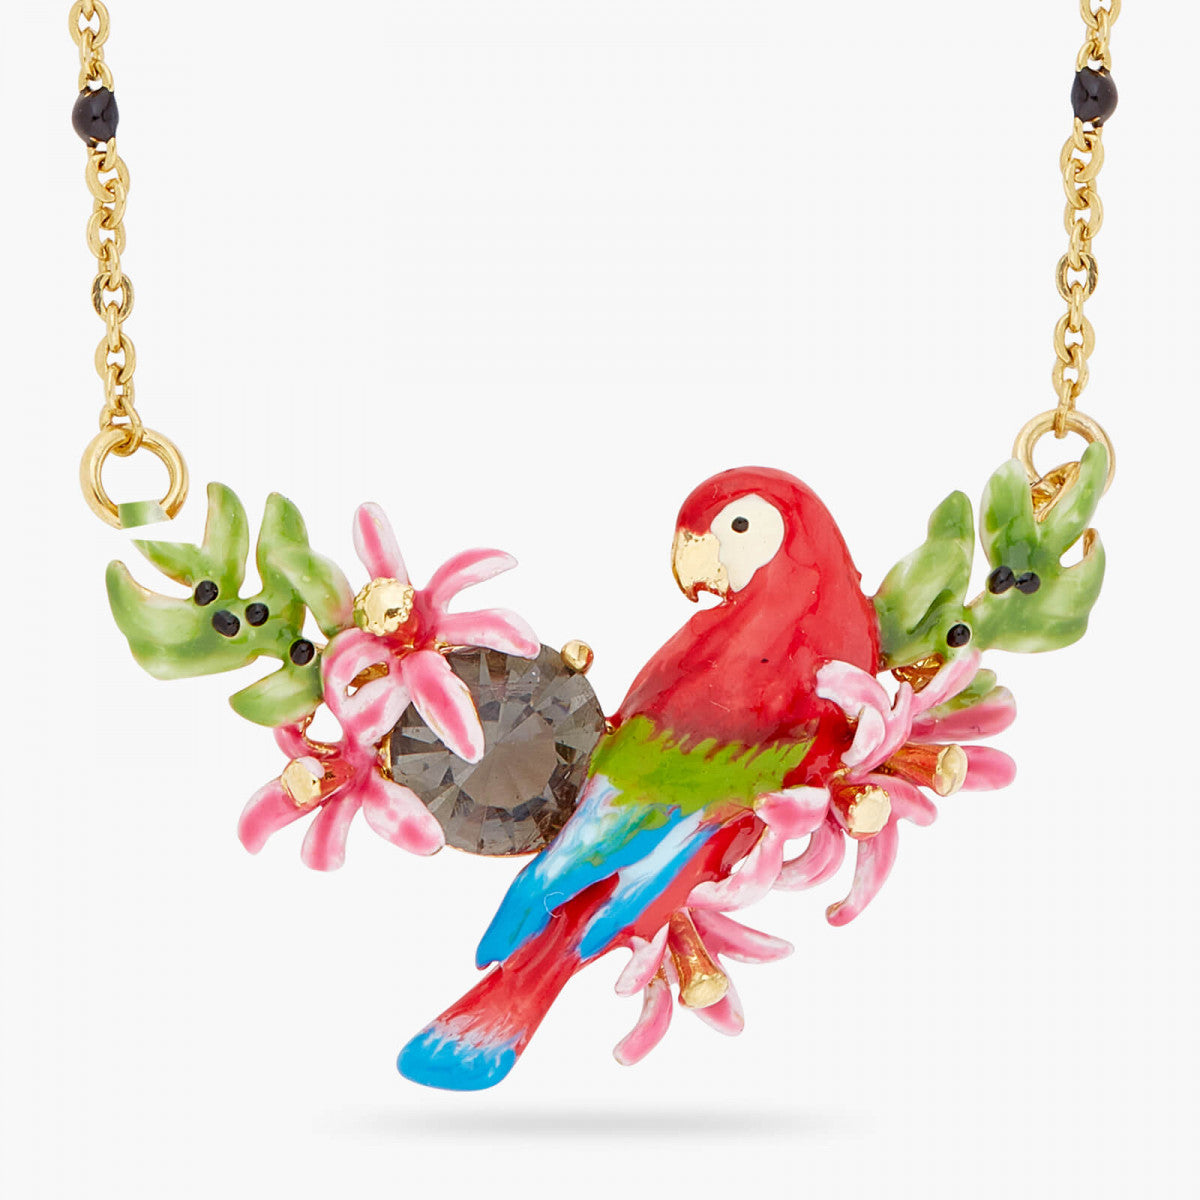 PARROT AND EXOTIC FLOWER STATEMENT NECKLACE